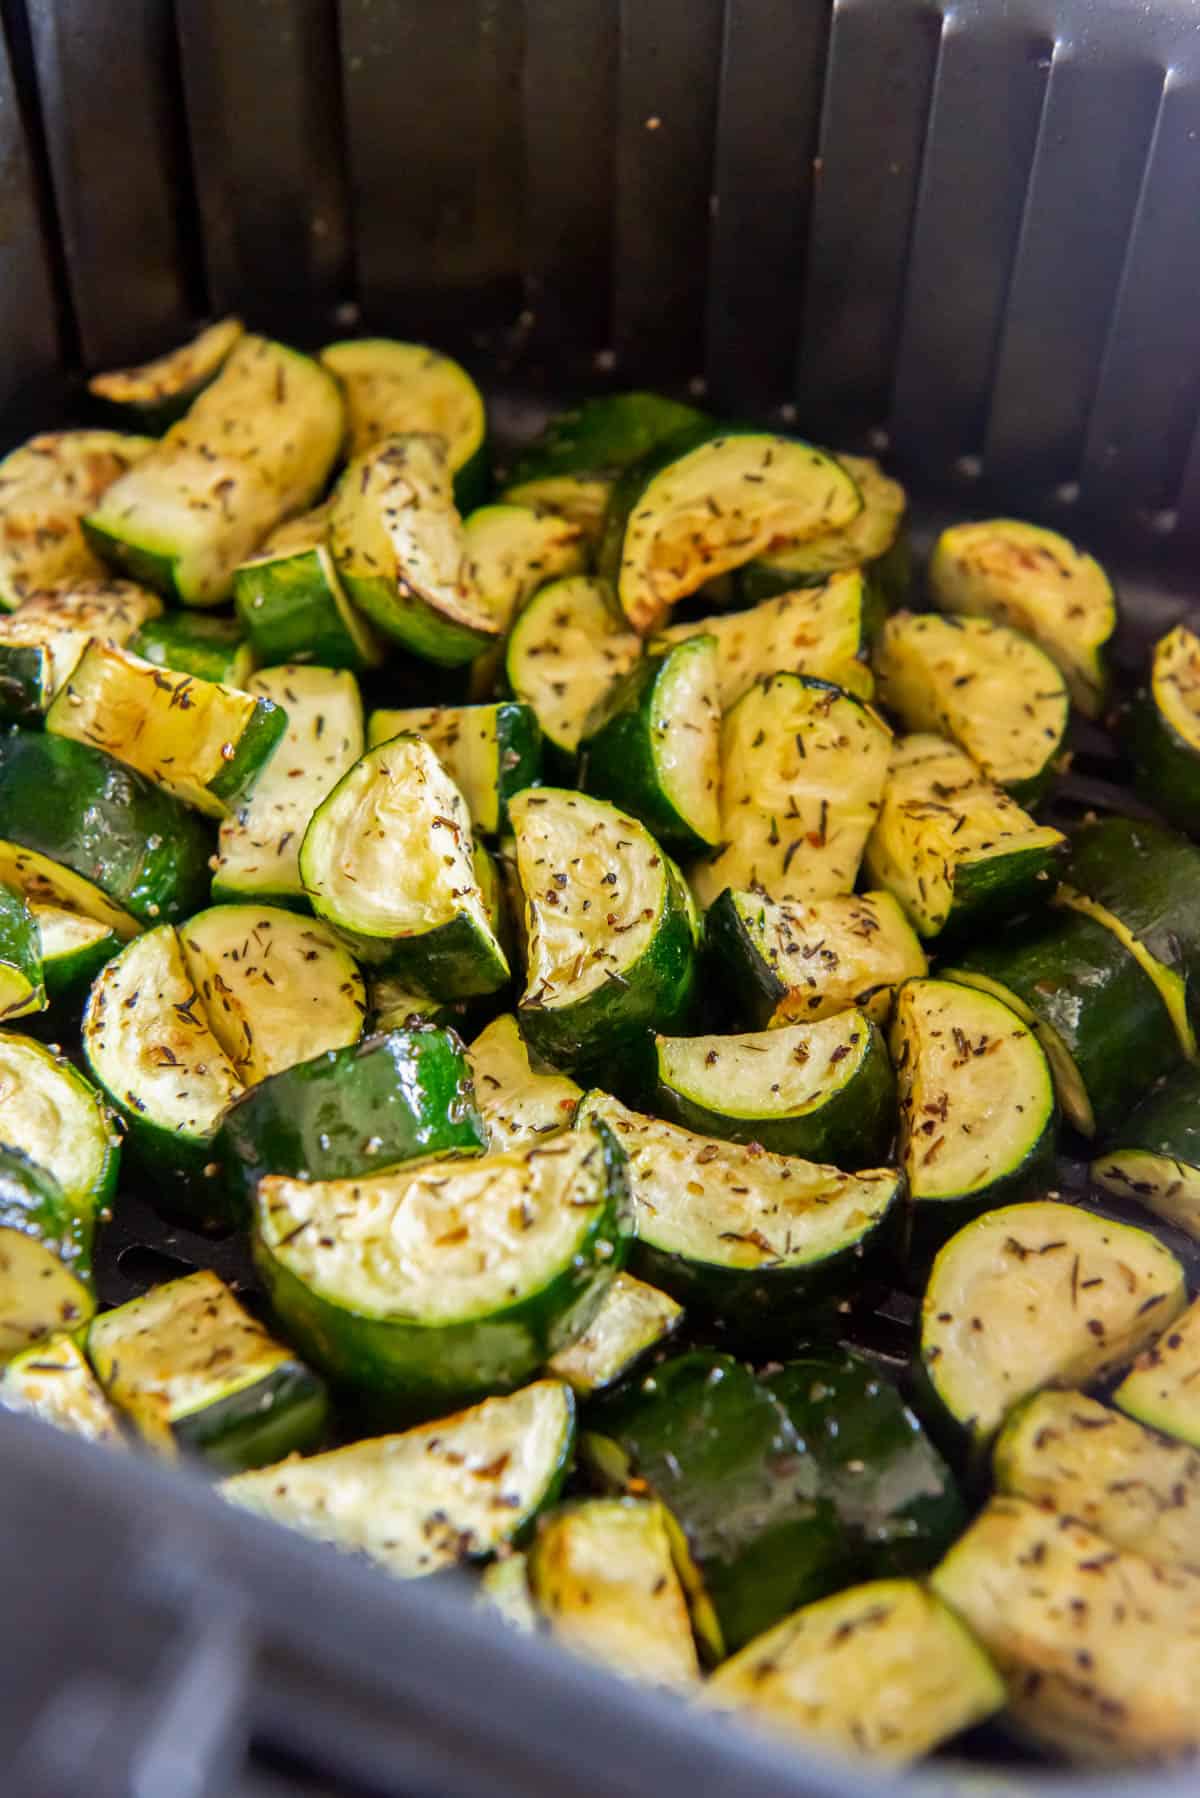 Zucchini in the air fryer basket after cooking.